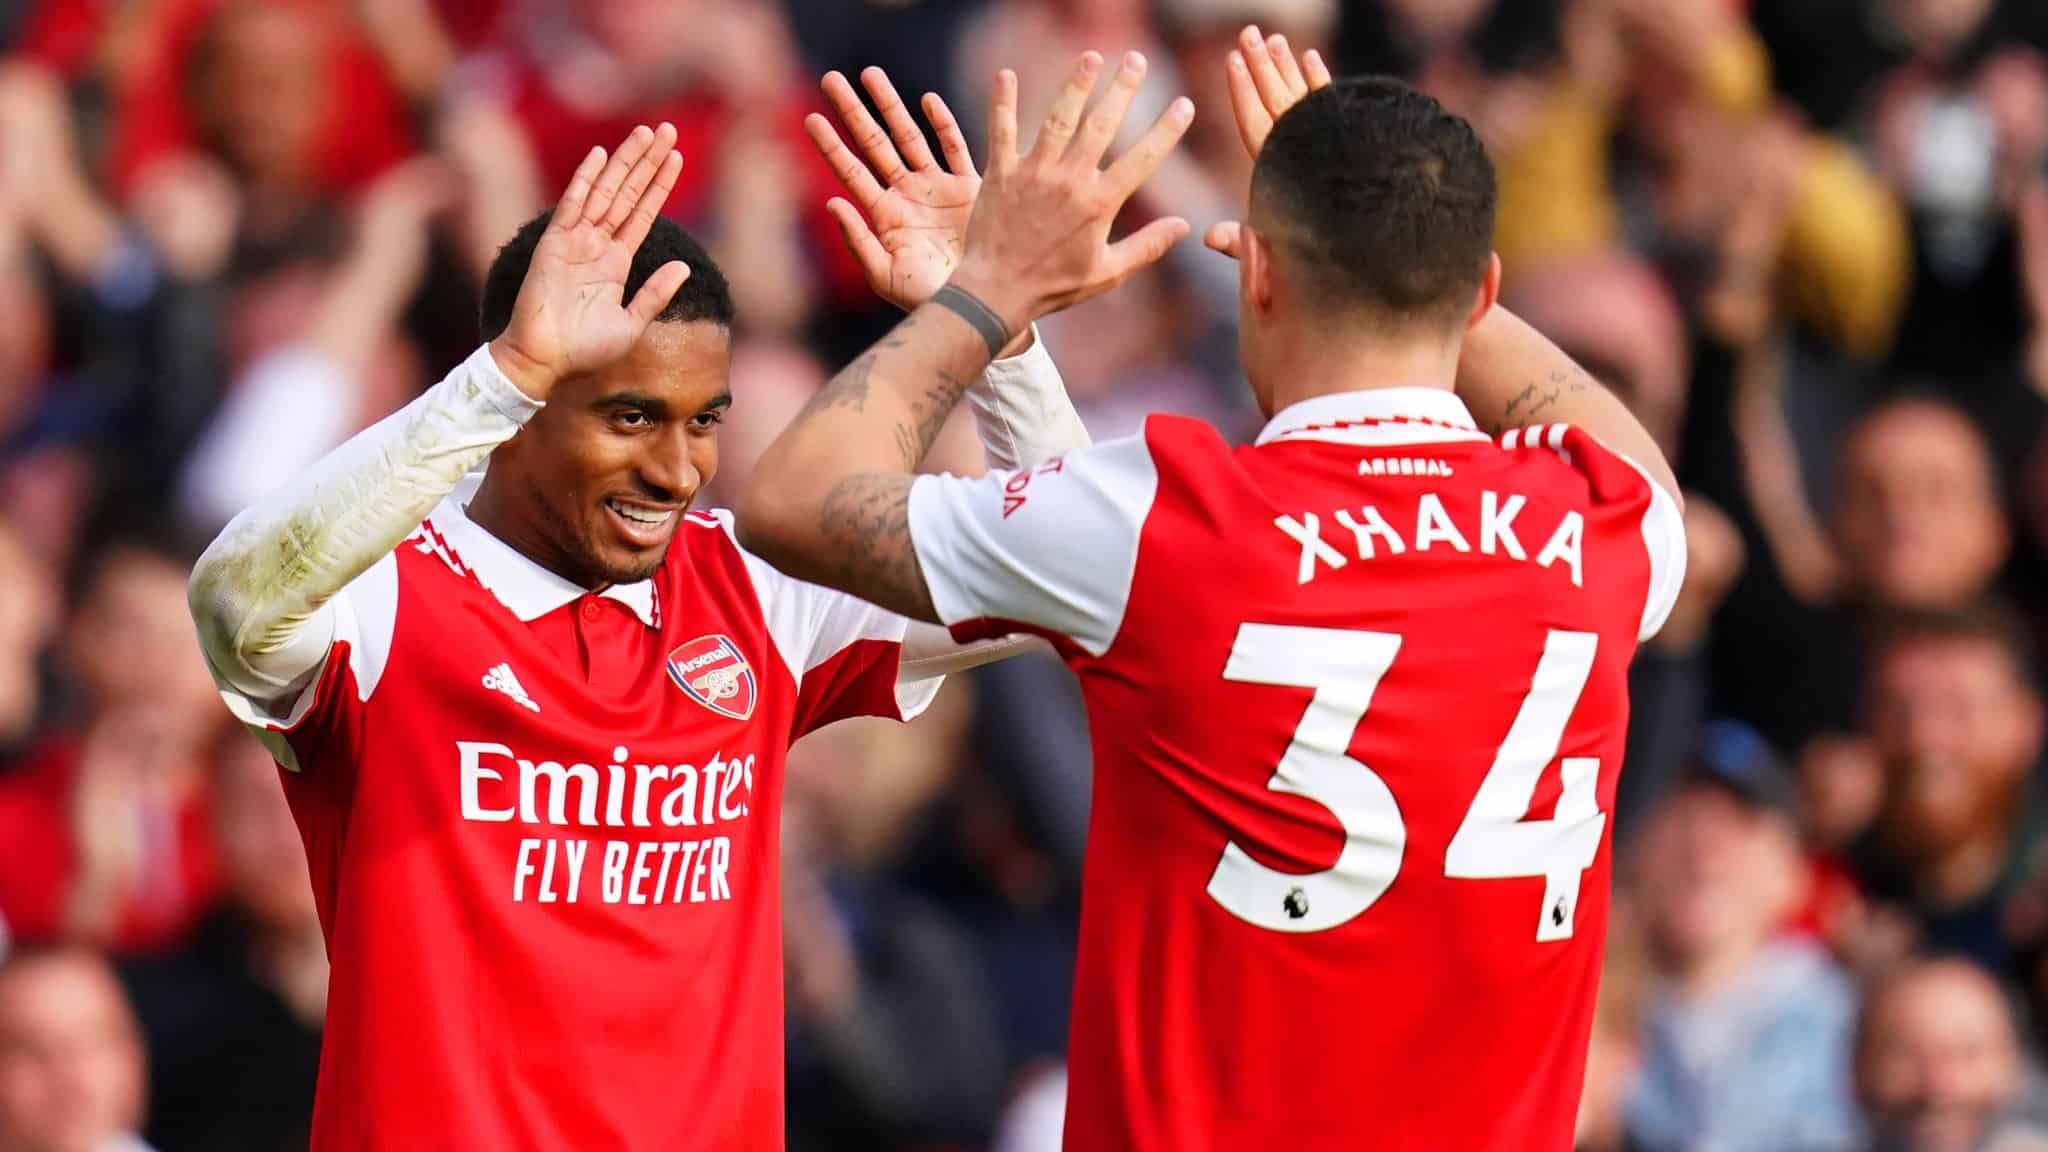 Arsenal goes back to top of Premier League table after defeating Nottingham Forest